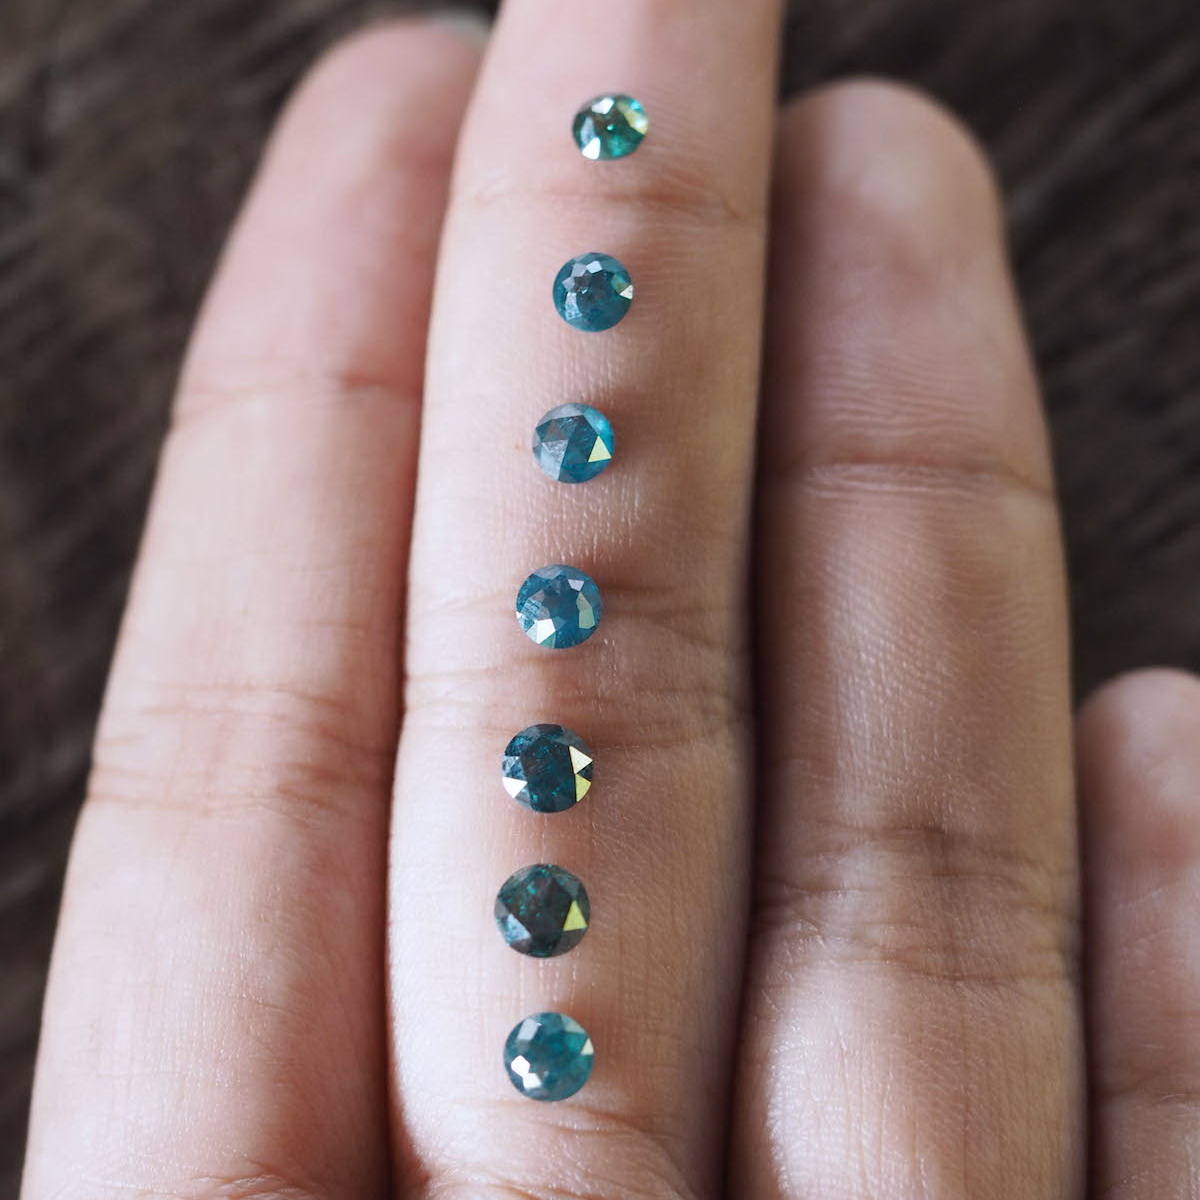 Round blue diamonds that have been irradiated for color